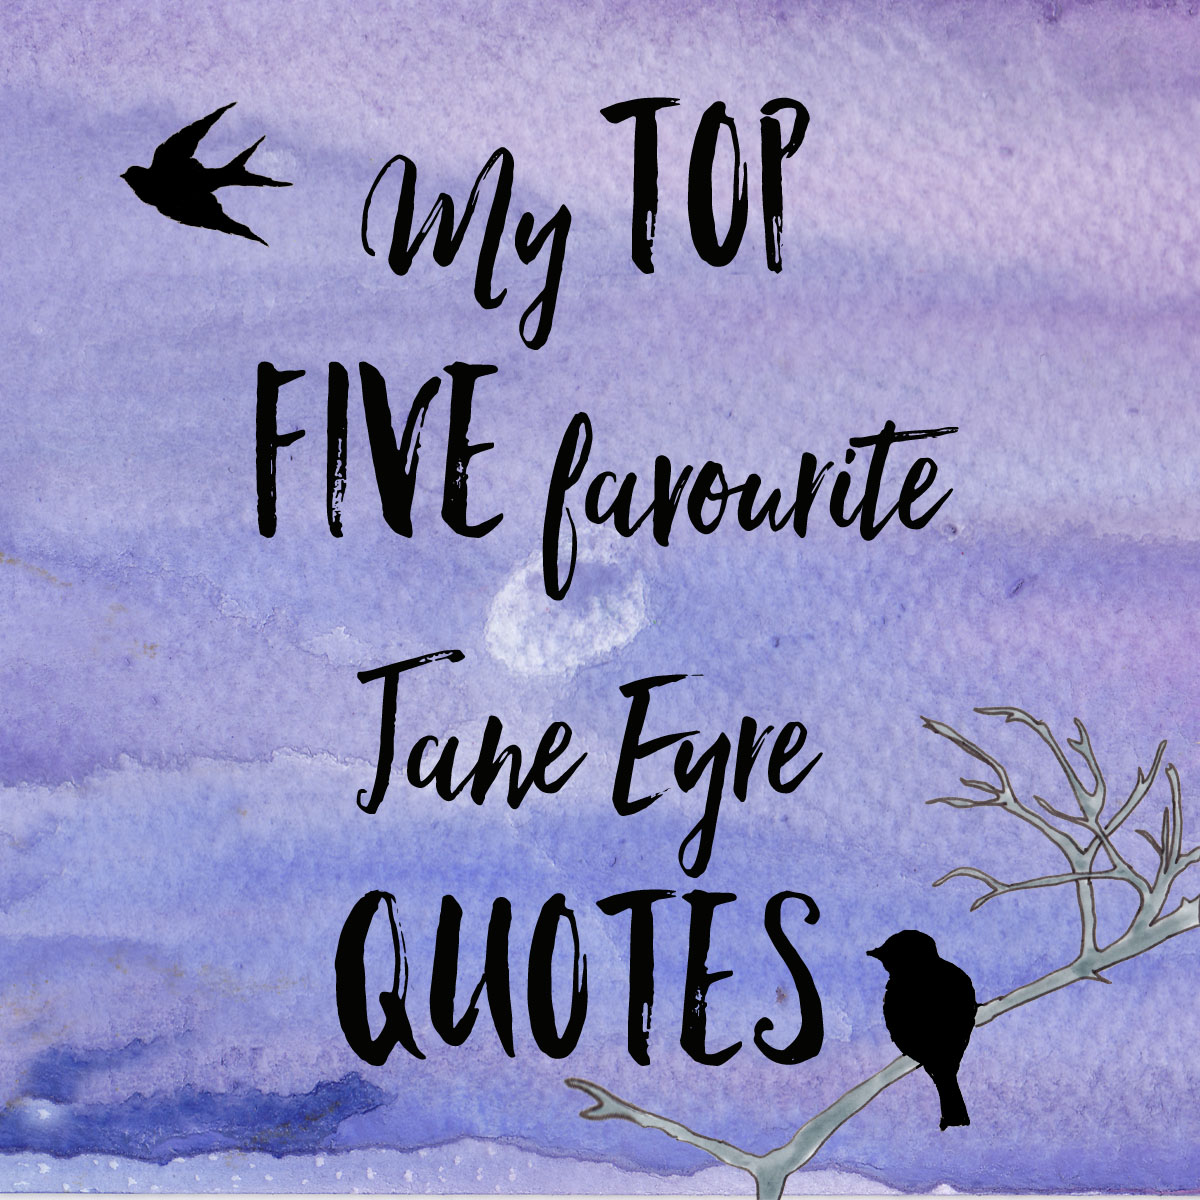 my top five favourite jane eyre quotes